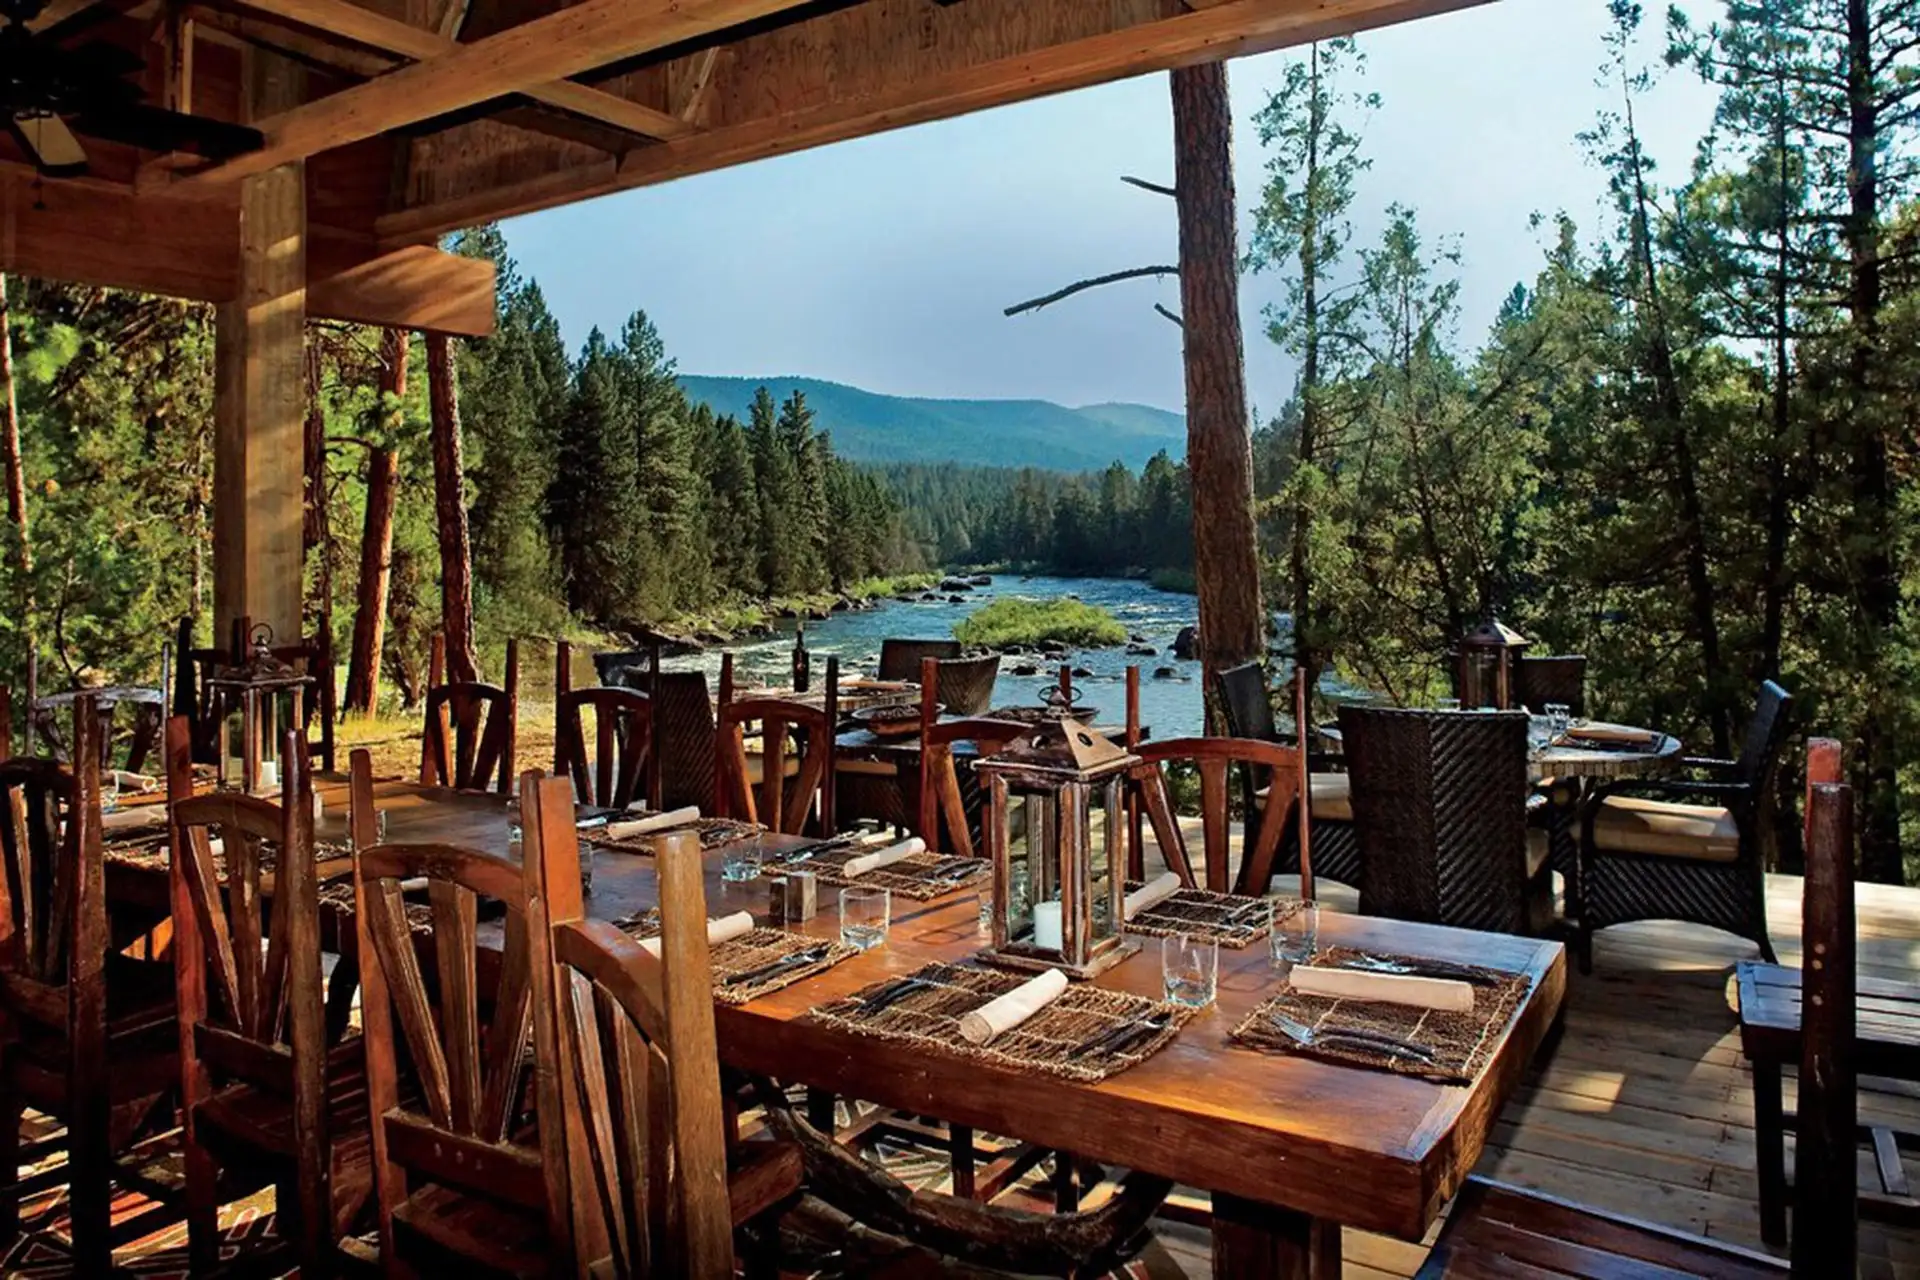 River Camp Dining Pavilion at The Resort at Paws Up in Montana